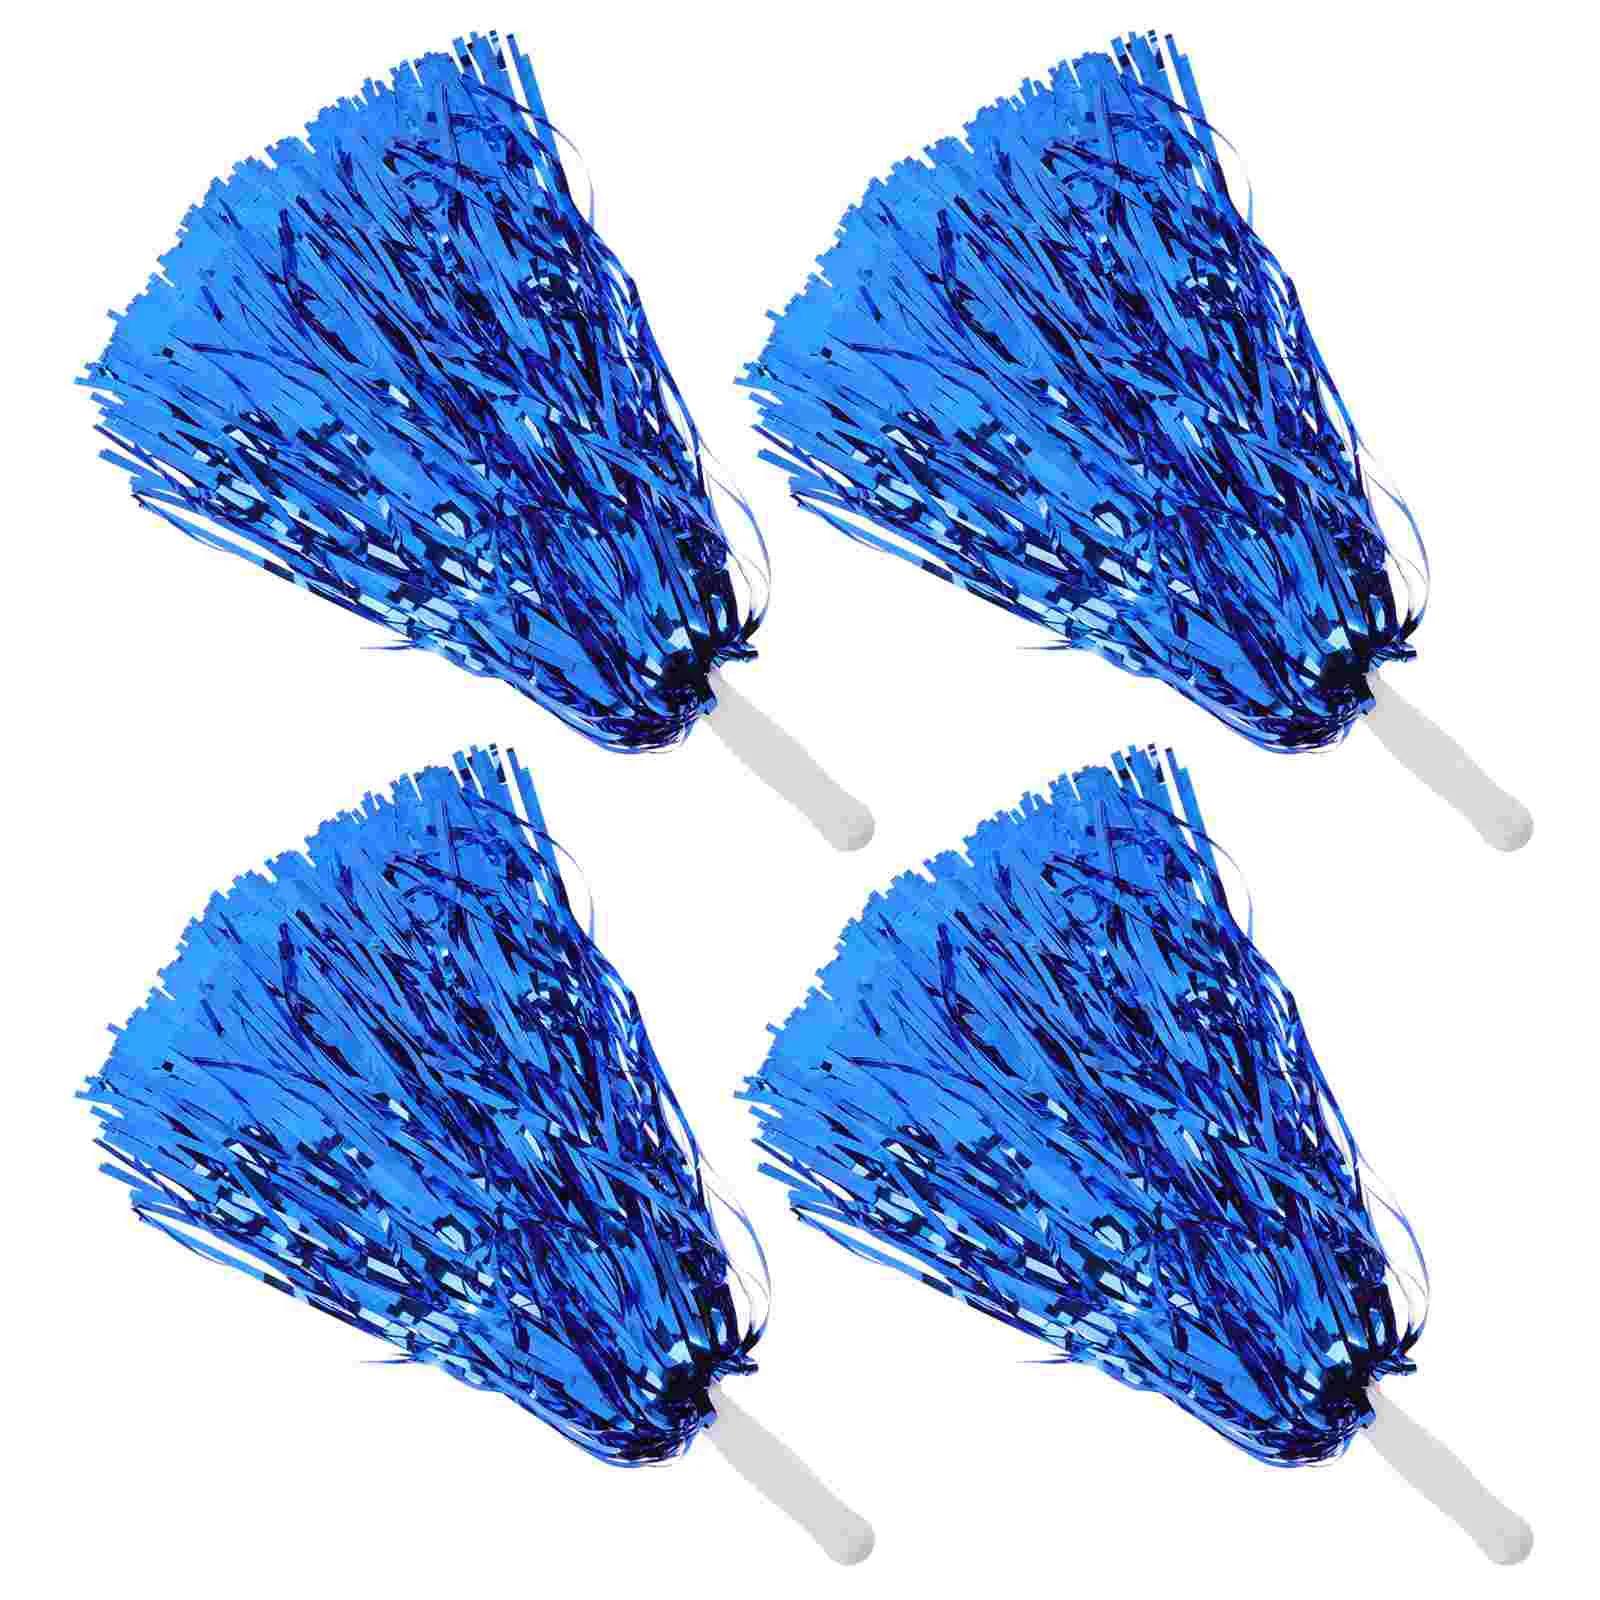 

4 Pcs Lala Flower Pom Poms Sports Cheering Props Cheerleaders Costume Accessory Aluminum Foil Wire Cheerleading